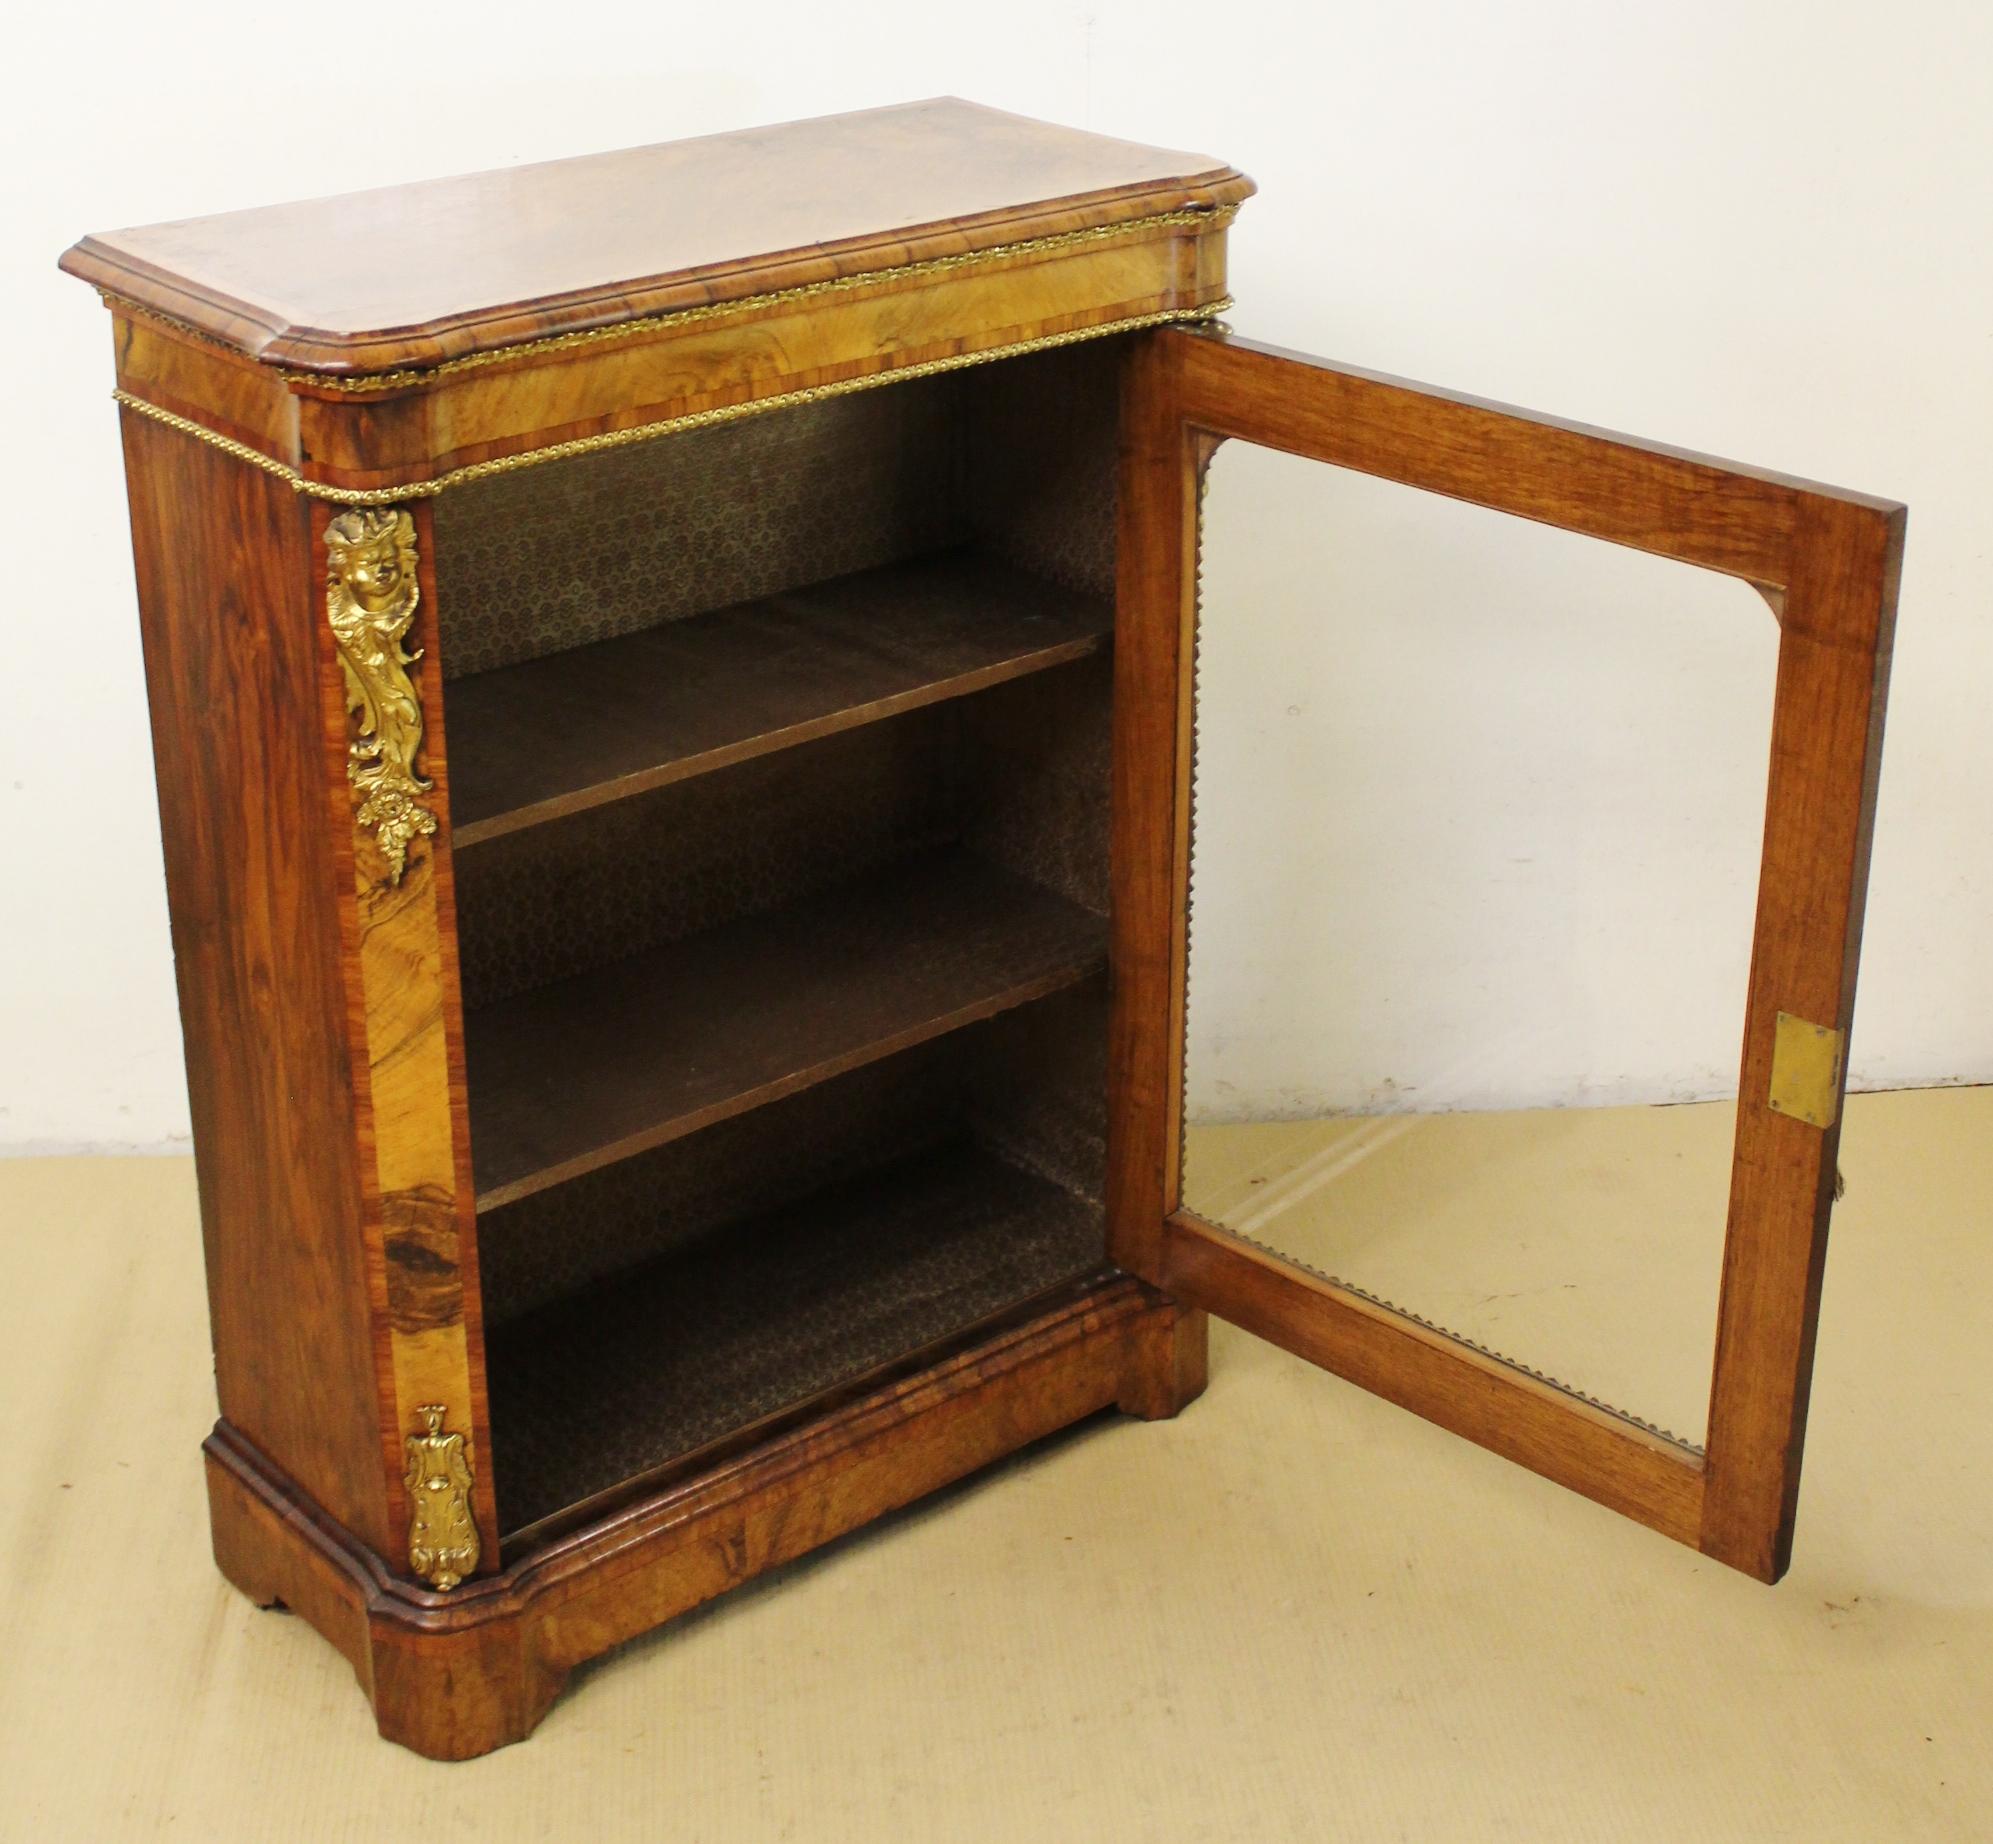 A superb quality Victorian period burr walnut pier cabinet. Of generous proportions and decorated throughout with tulip wood banding and crisp brass ormolu mounts. The single glazed door (lockable with key supplied) opens to access a shelved and